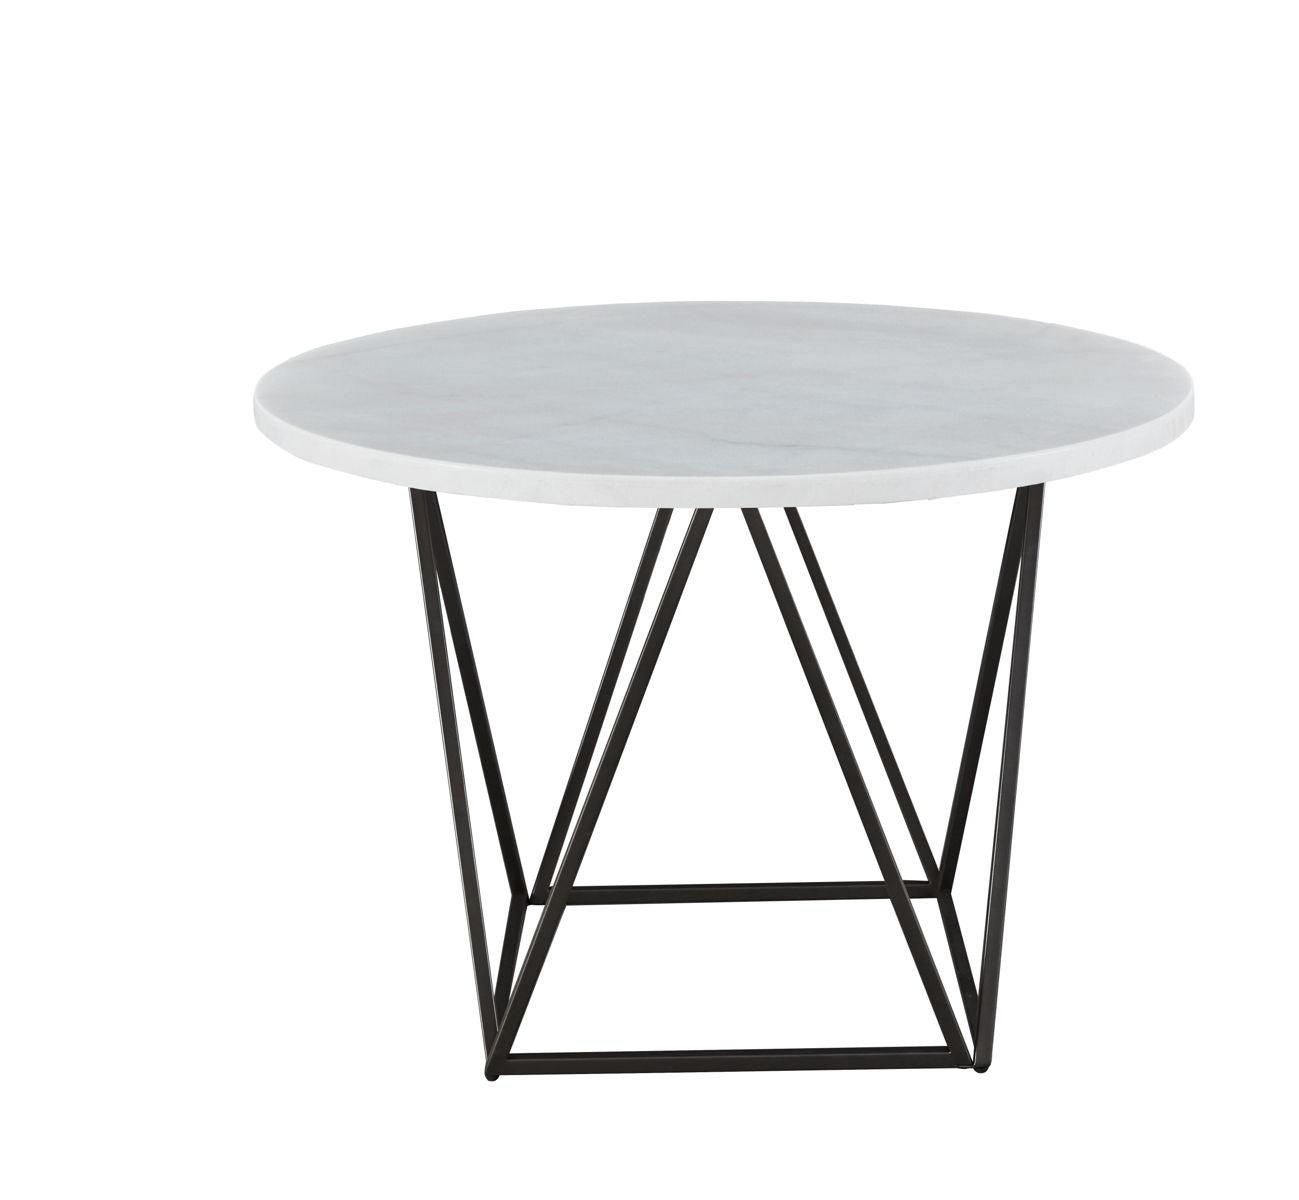 Steve Silver Furniture - Ramona - Marble Top Round Dining Table - White - 5th Avenue Furniture